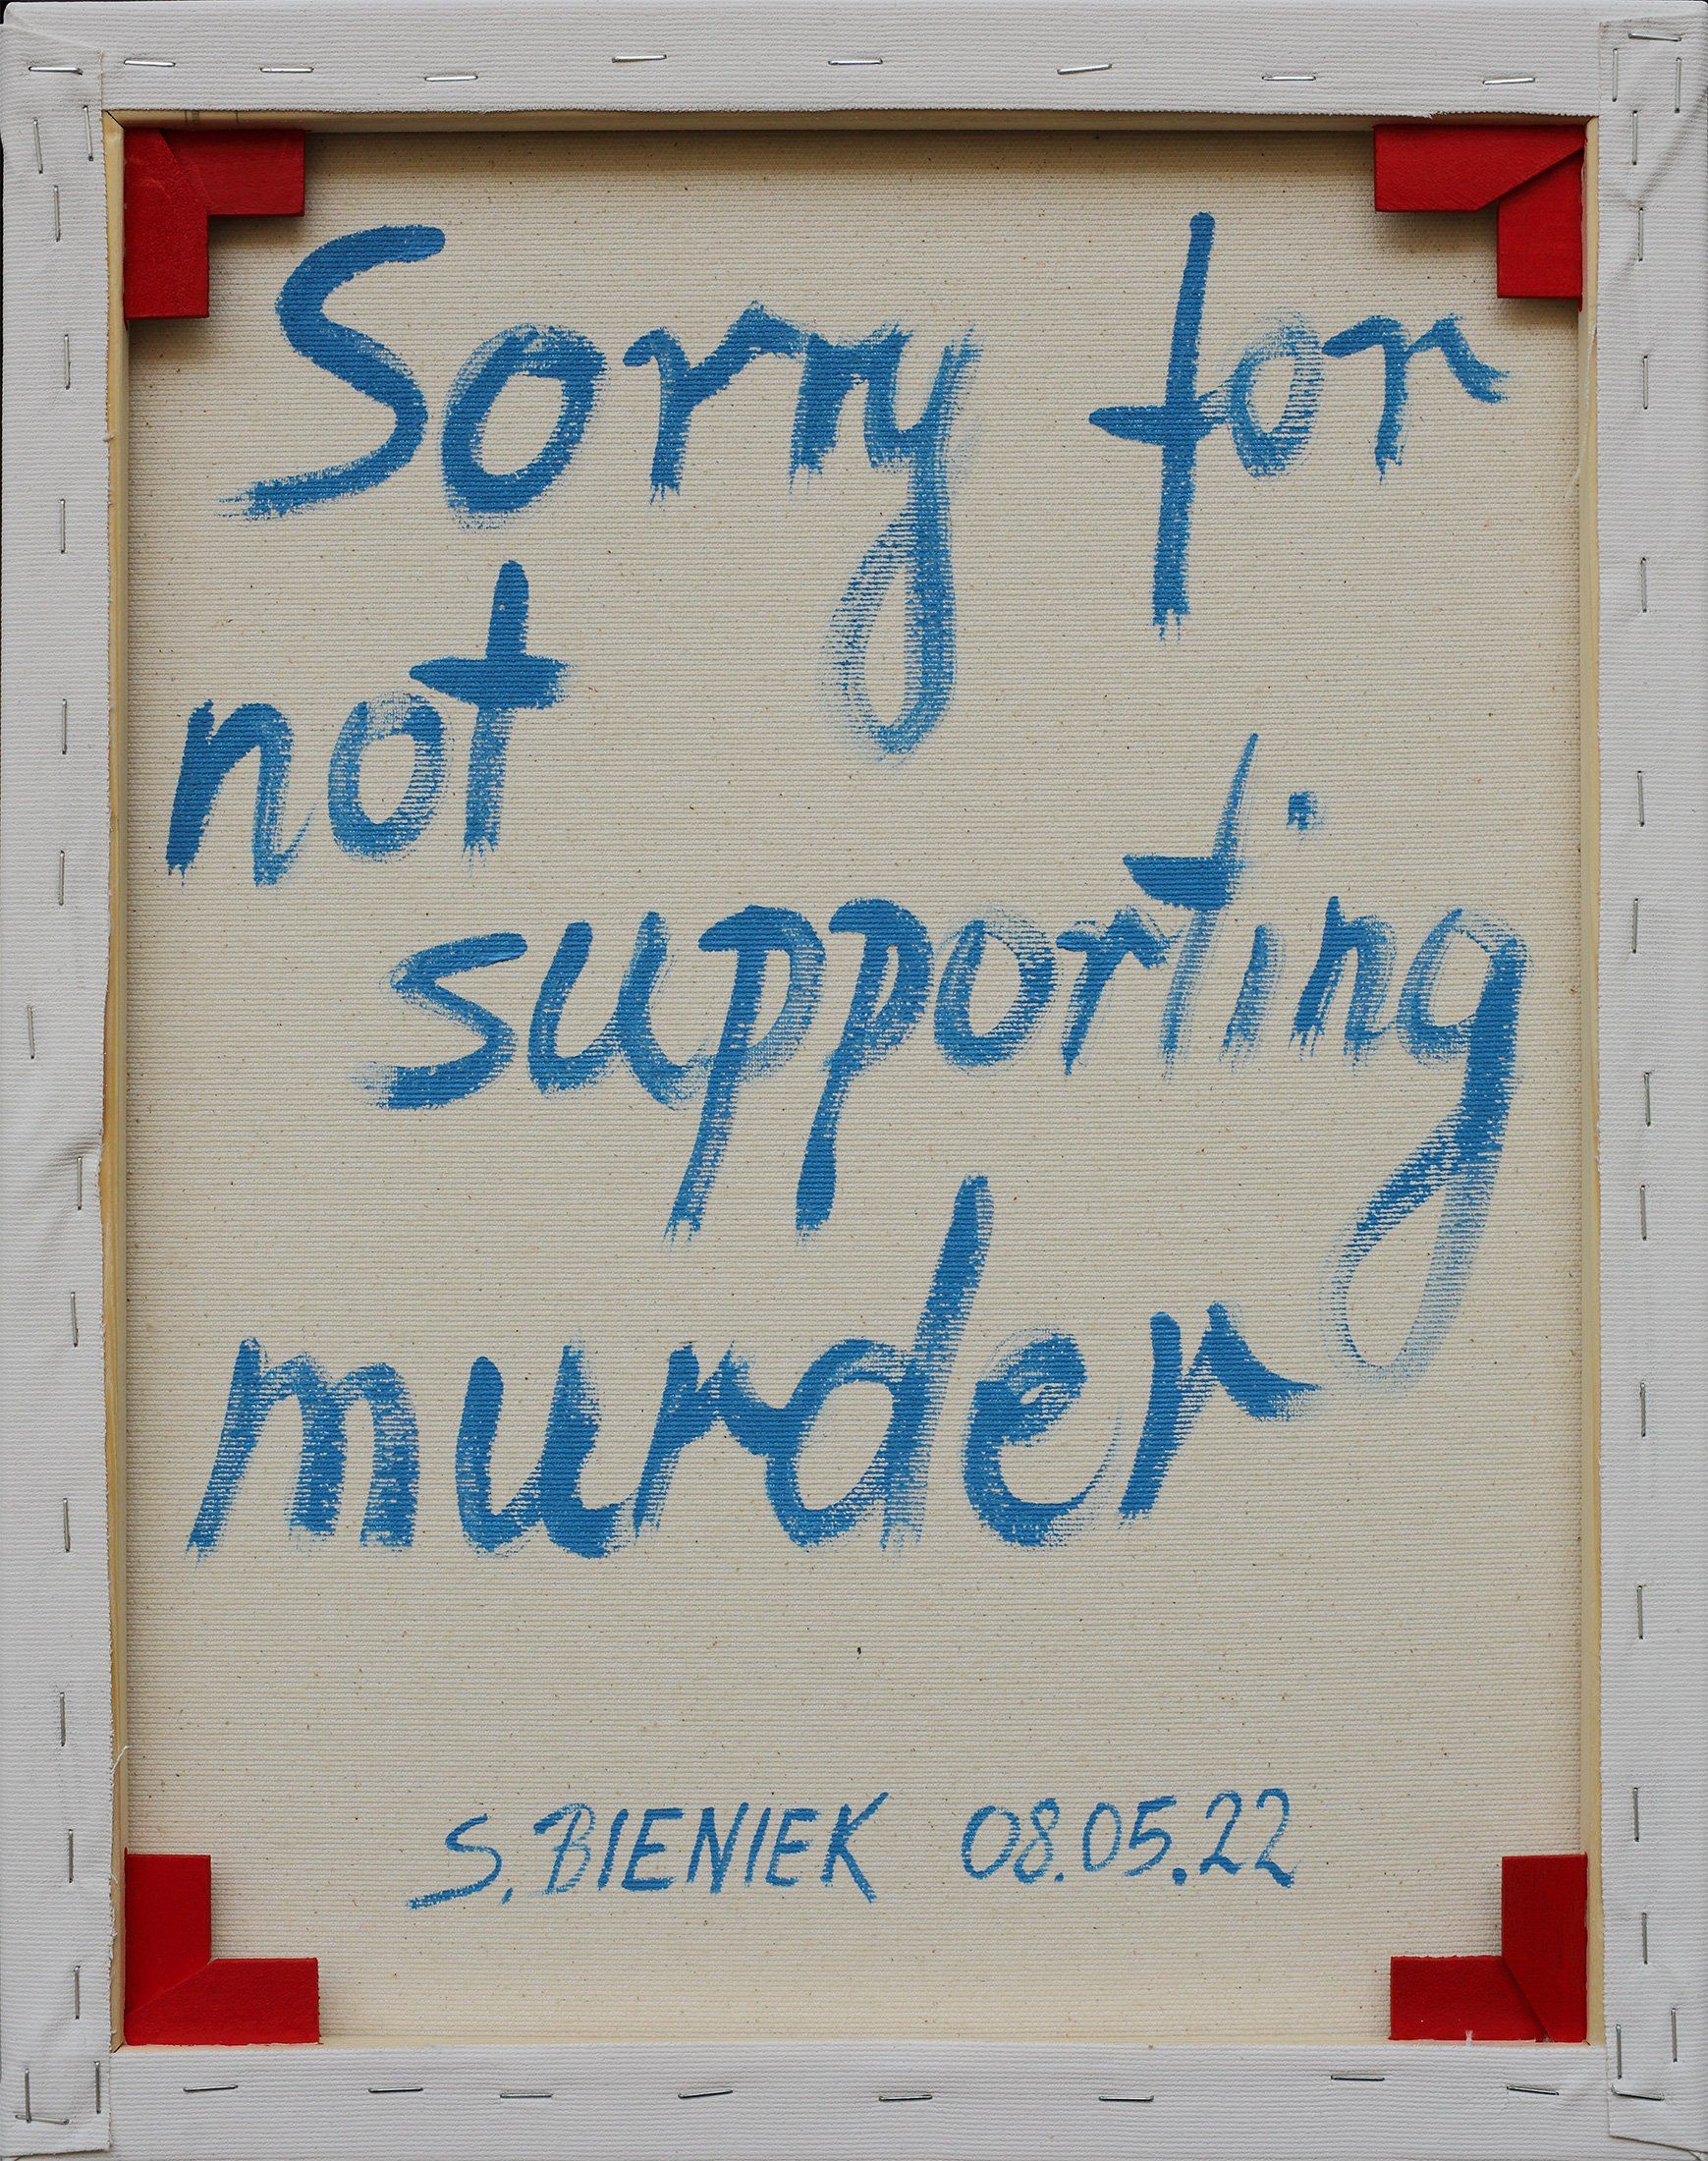 „Sorry for not supporting murder“. Painting from the series of 